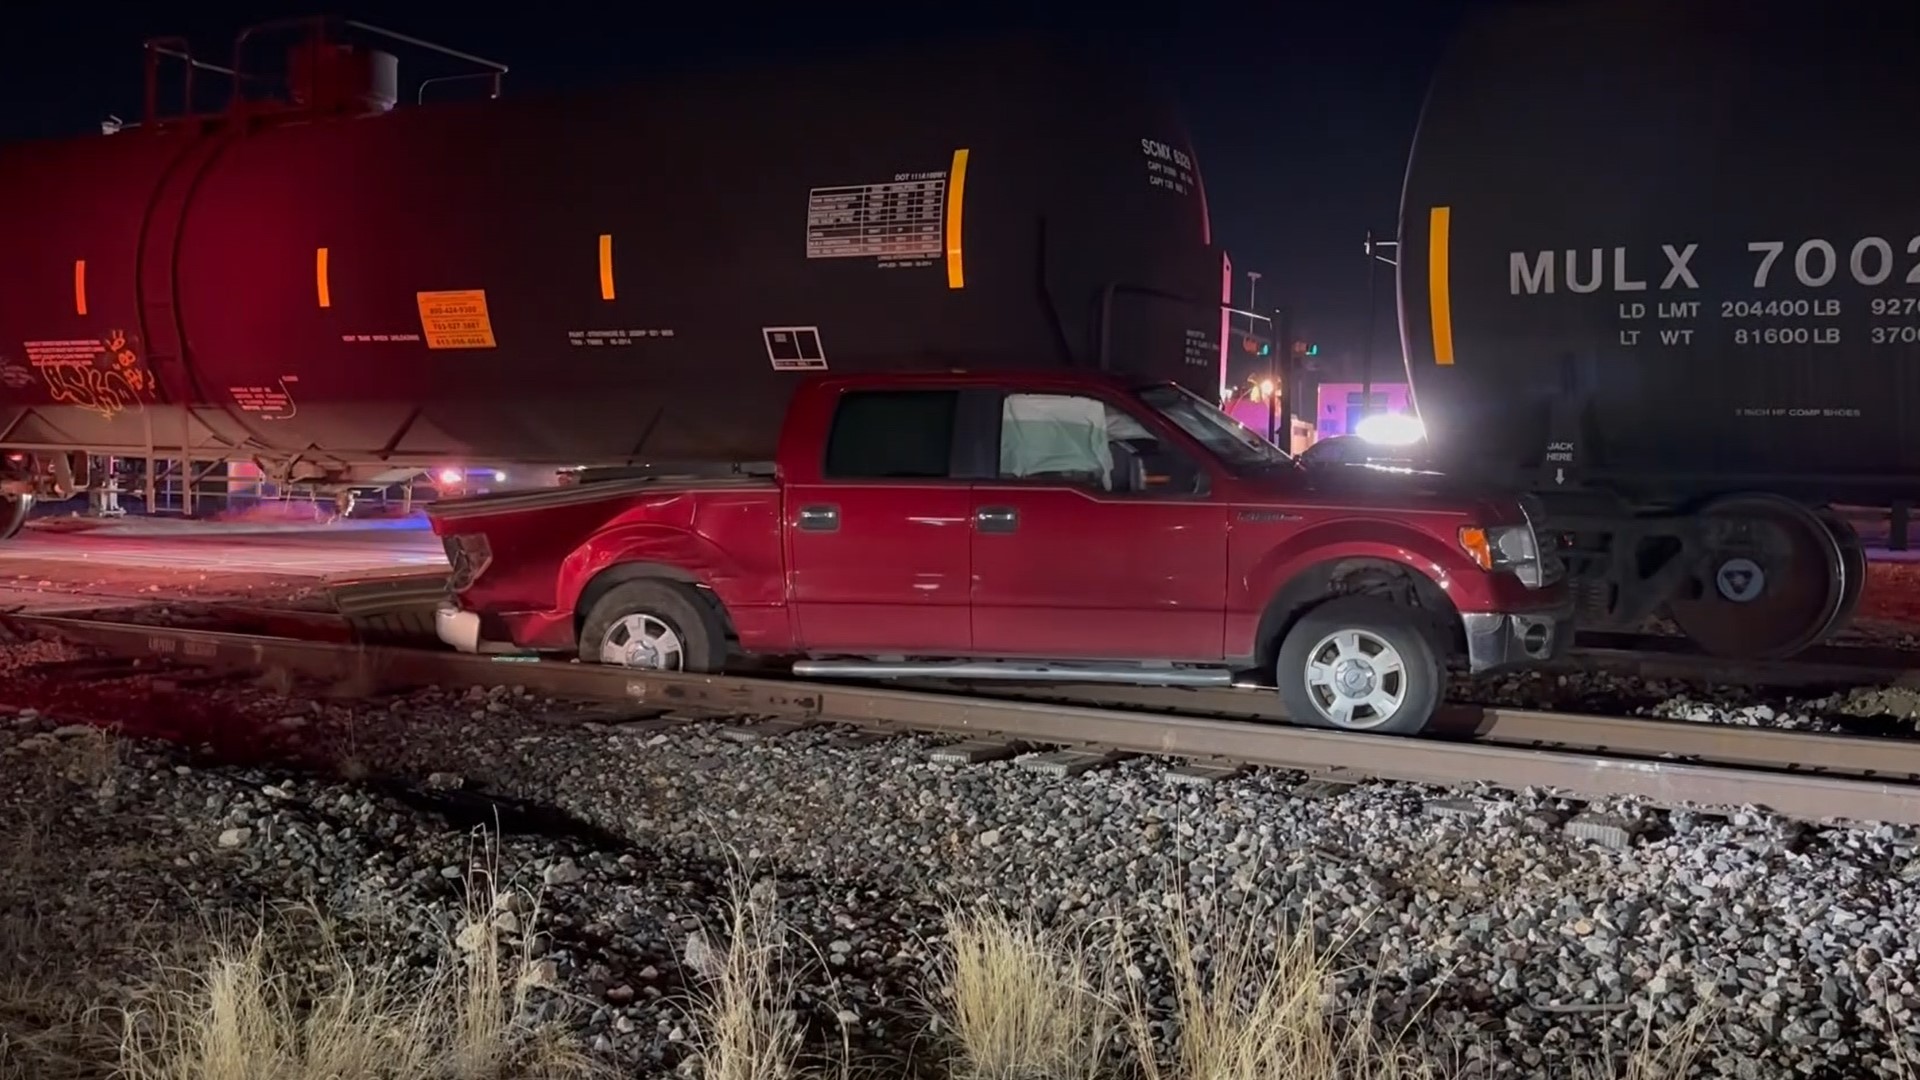 The truck was hit by the train after it got stuck on the tracks.